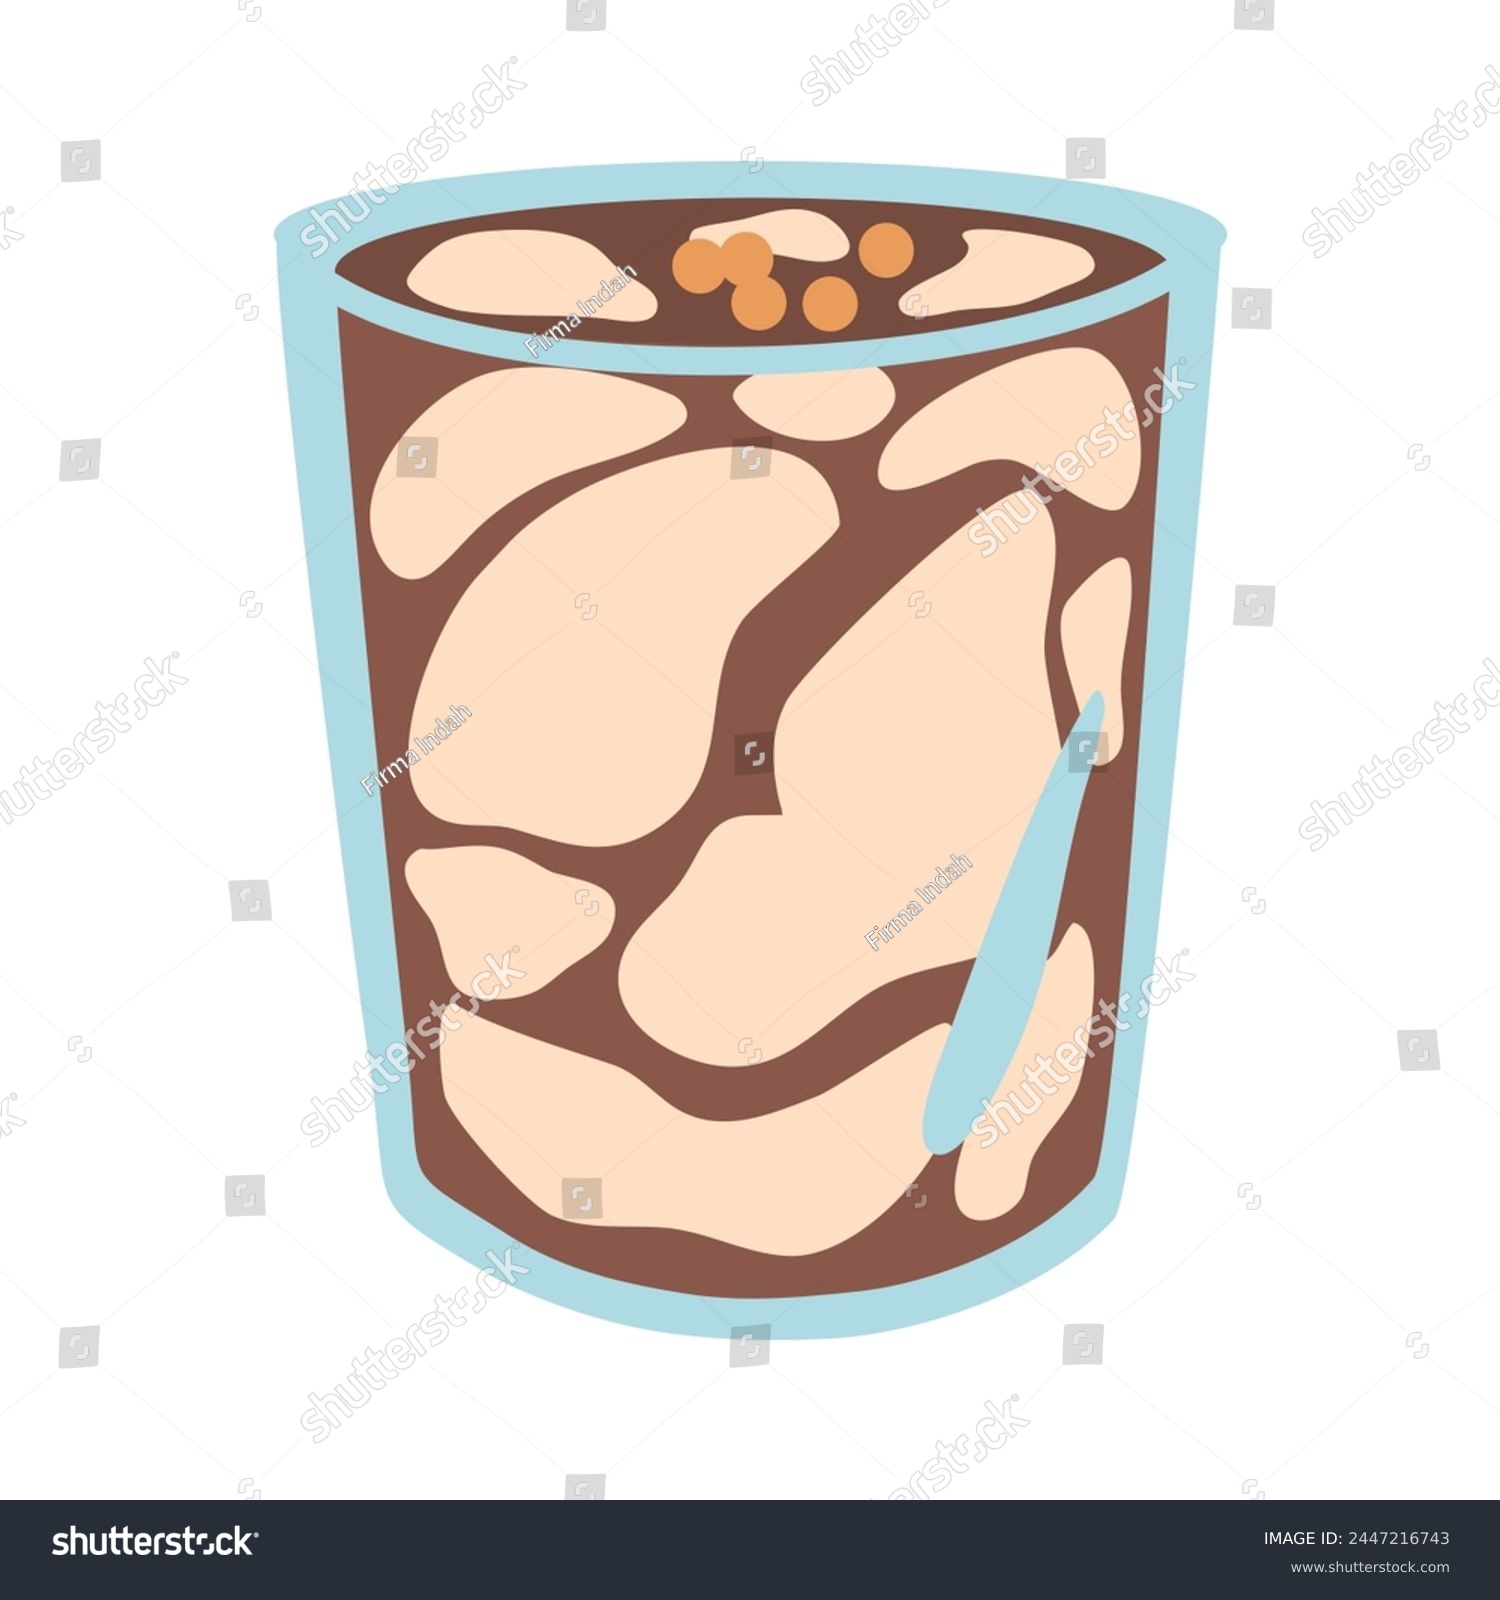 SVG of Glass of Taho and a Jar of Syrup svg